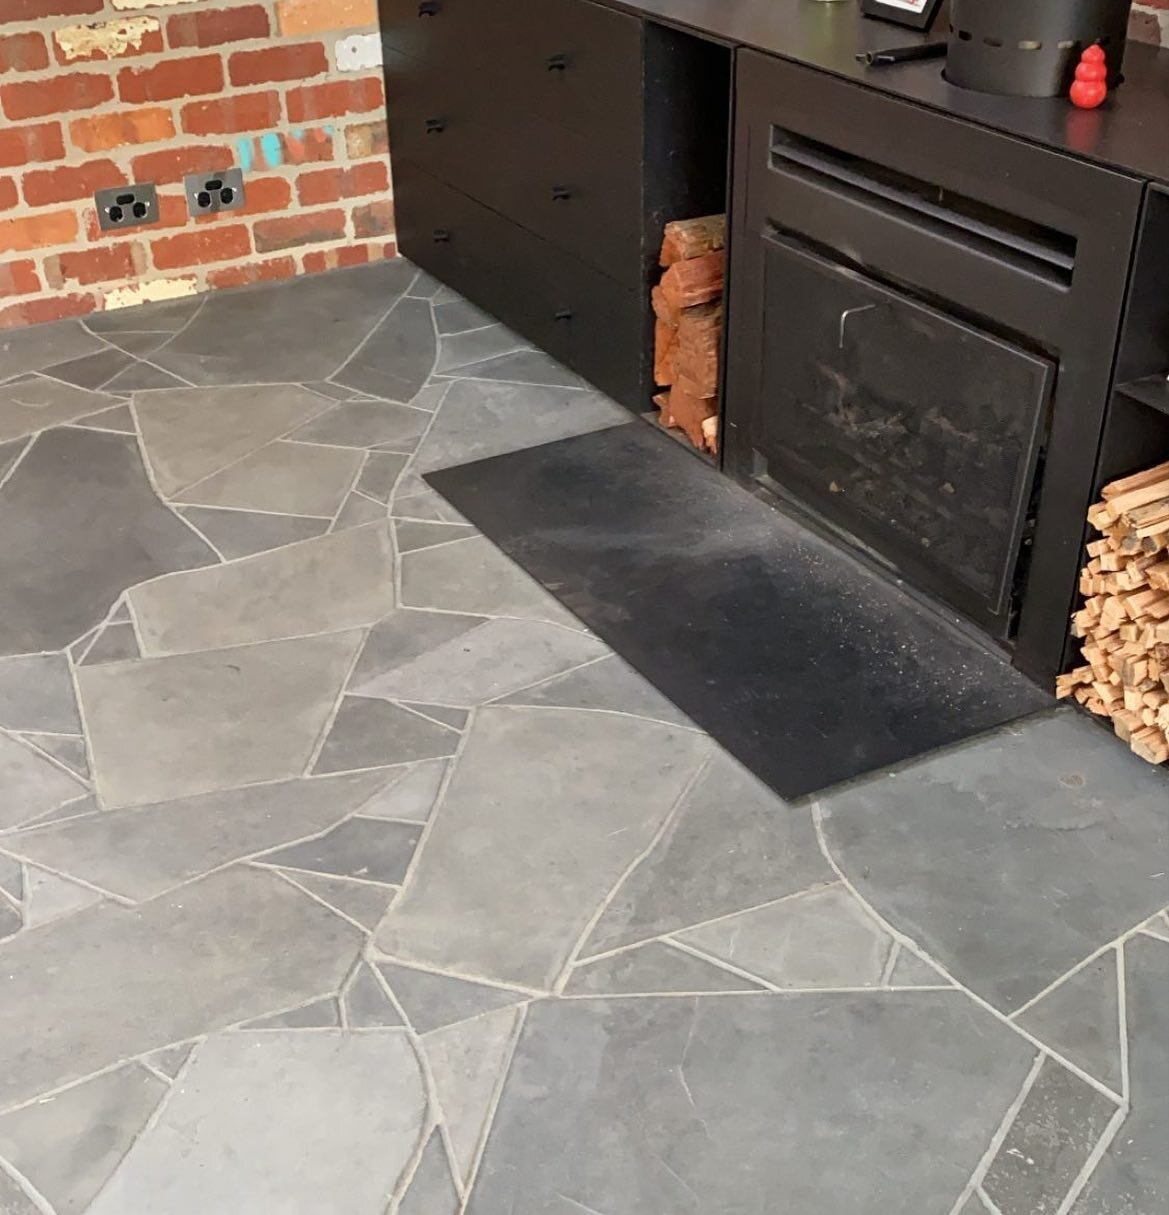 Mintaro slate crazy paving blending in beautifully with the fireplace and recycled red brick wall.
7mm grout joints meant nearly every side of each piece had to be manufactured.

Builder - @built.by.guild 
Crazy paving - @easternlandscapes